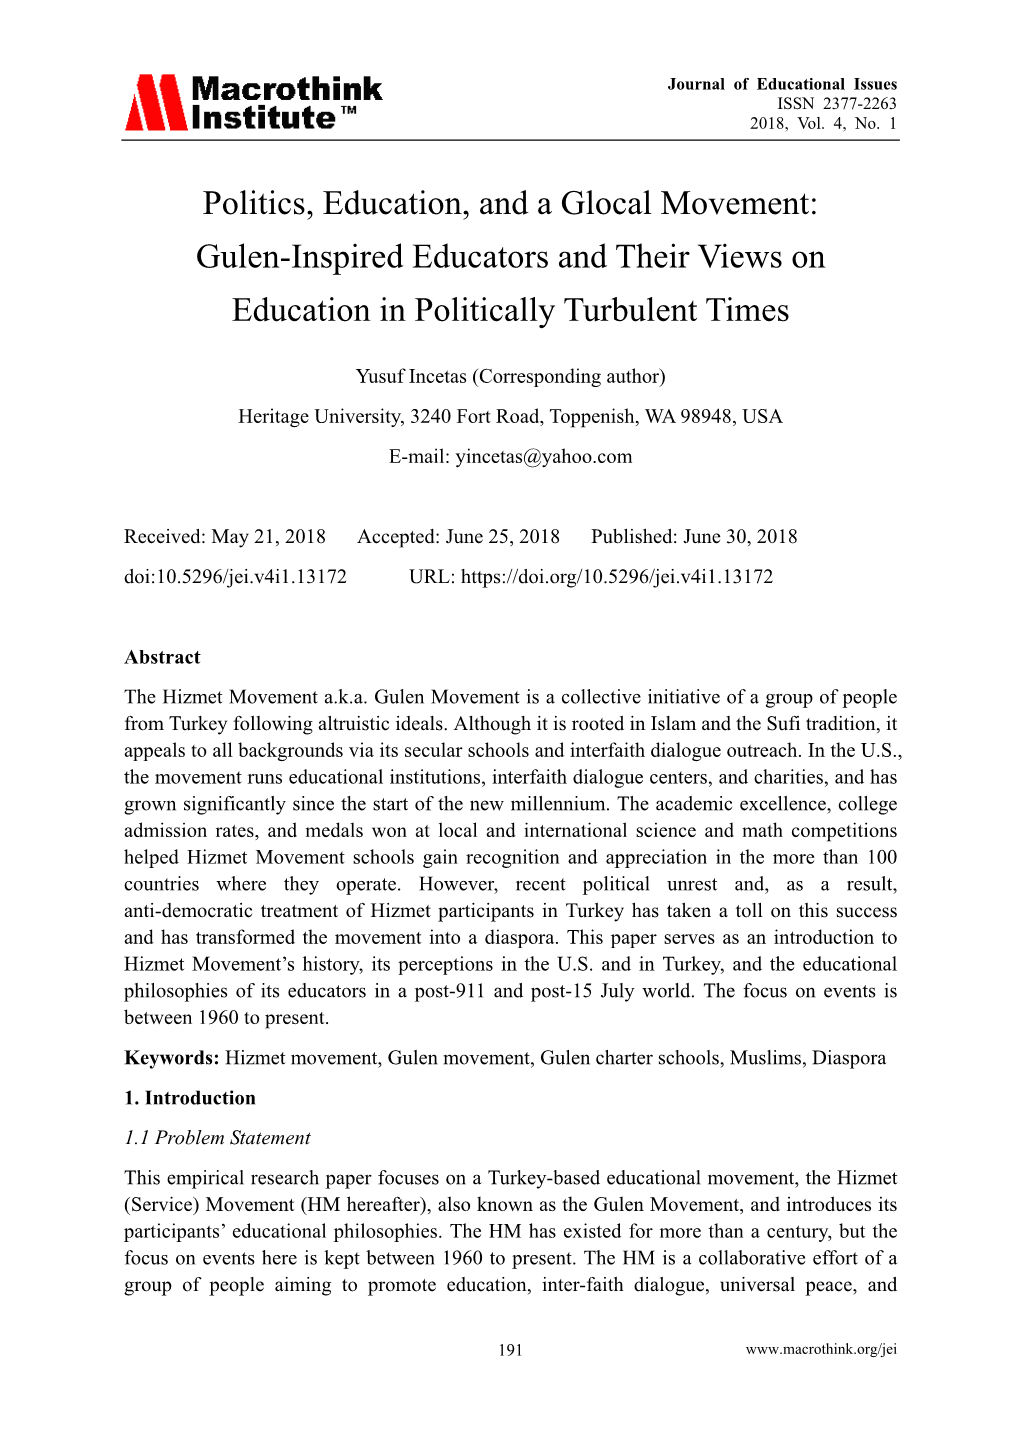 Politics, Education, and a Glocal Movement: Gulen-Inspired Educators and Their Views on Education in Politically Turbulent Times